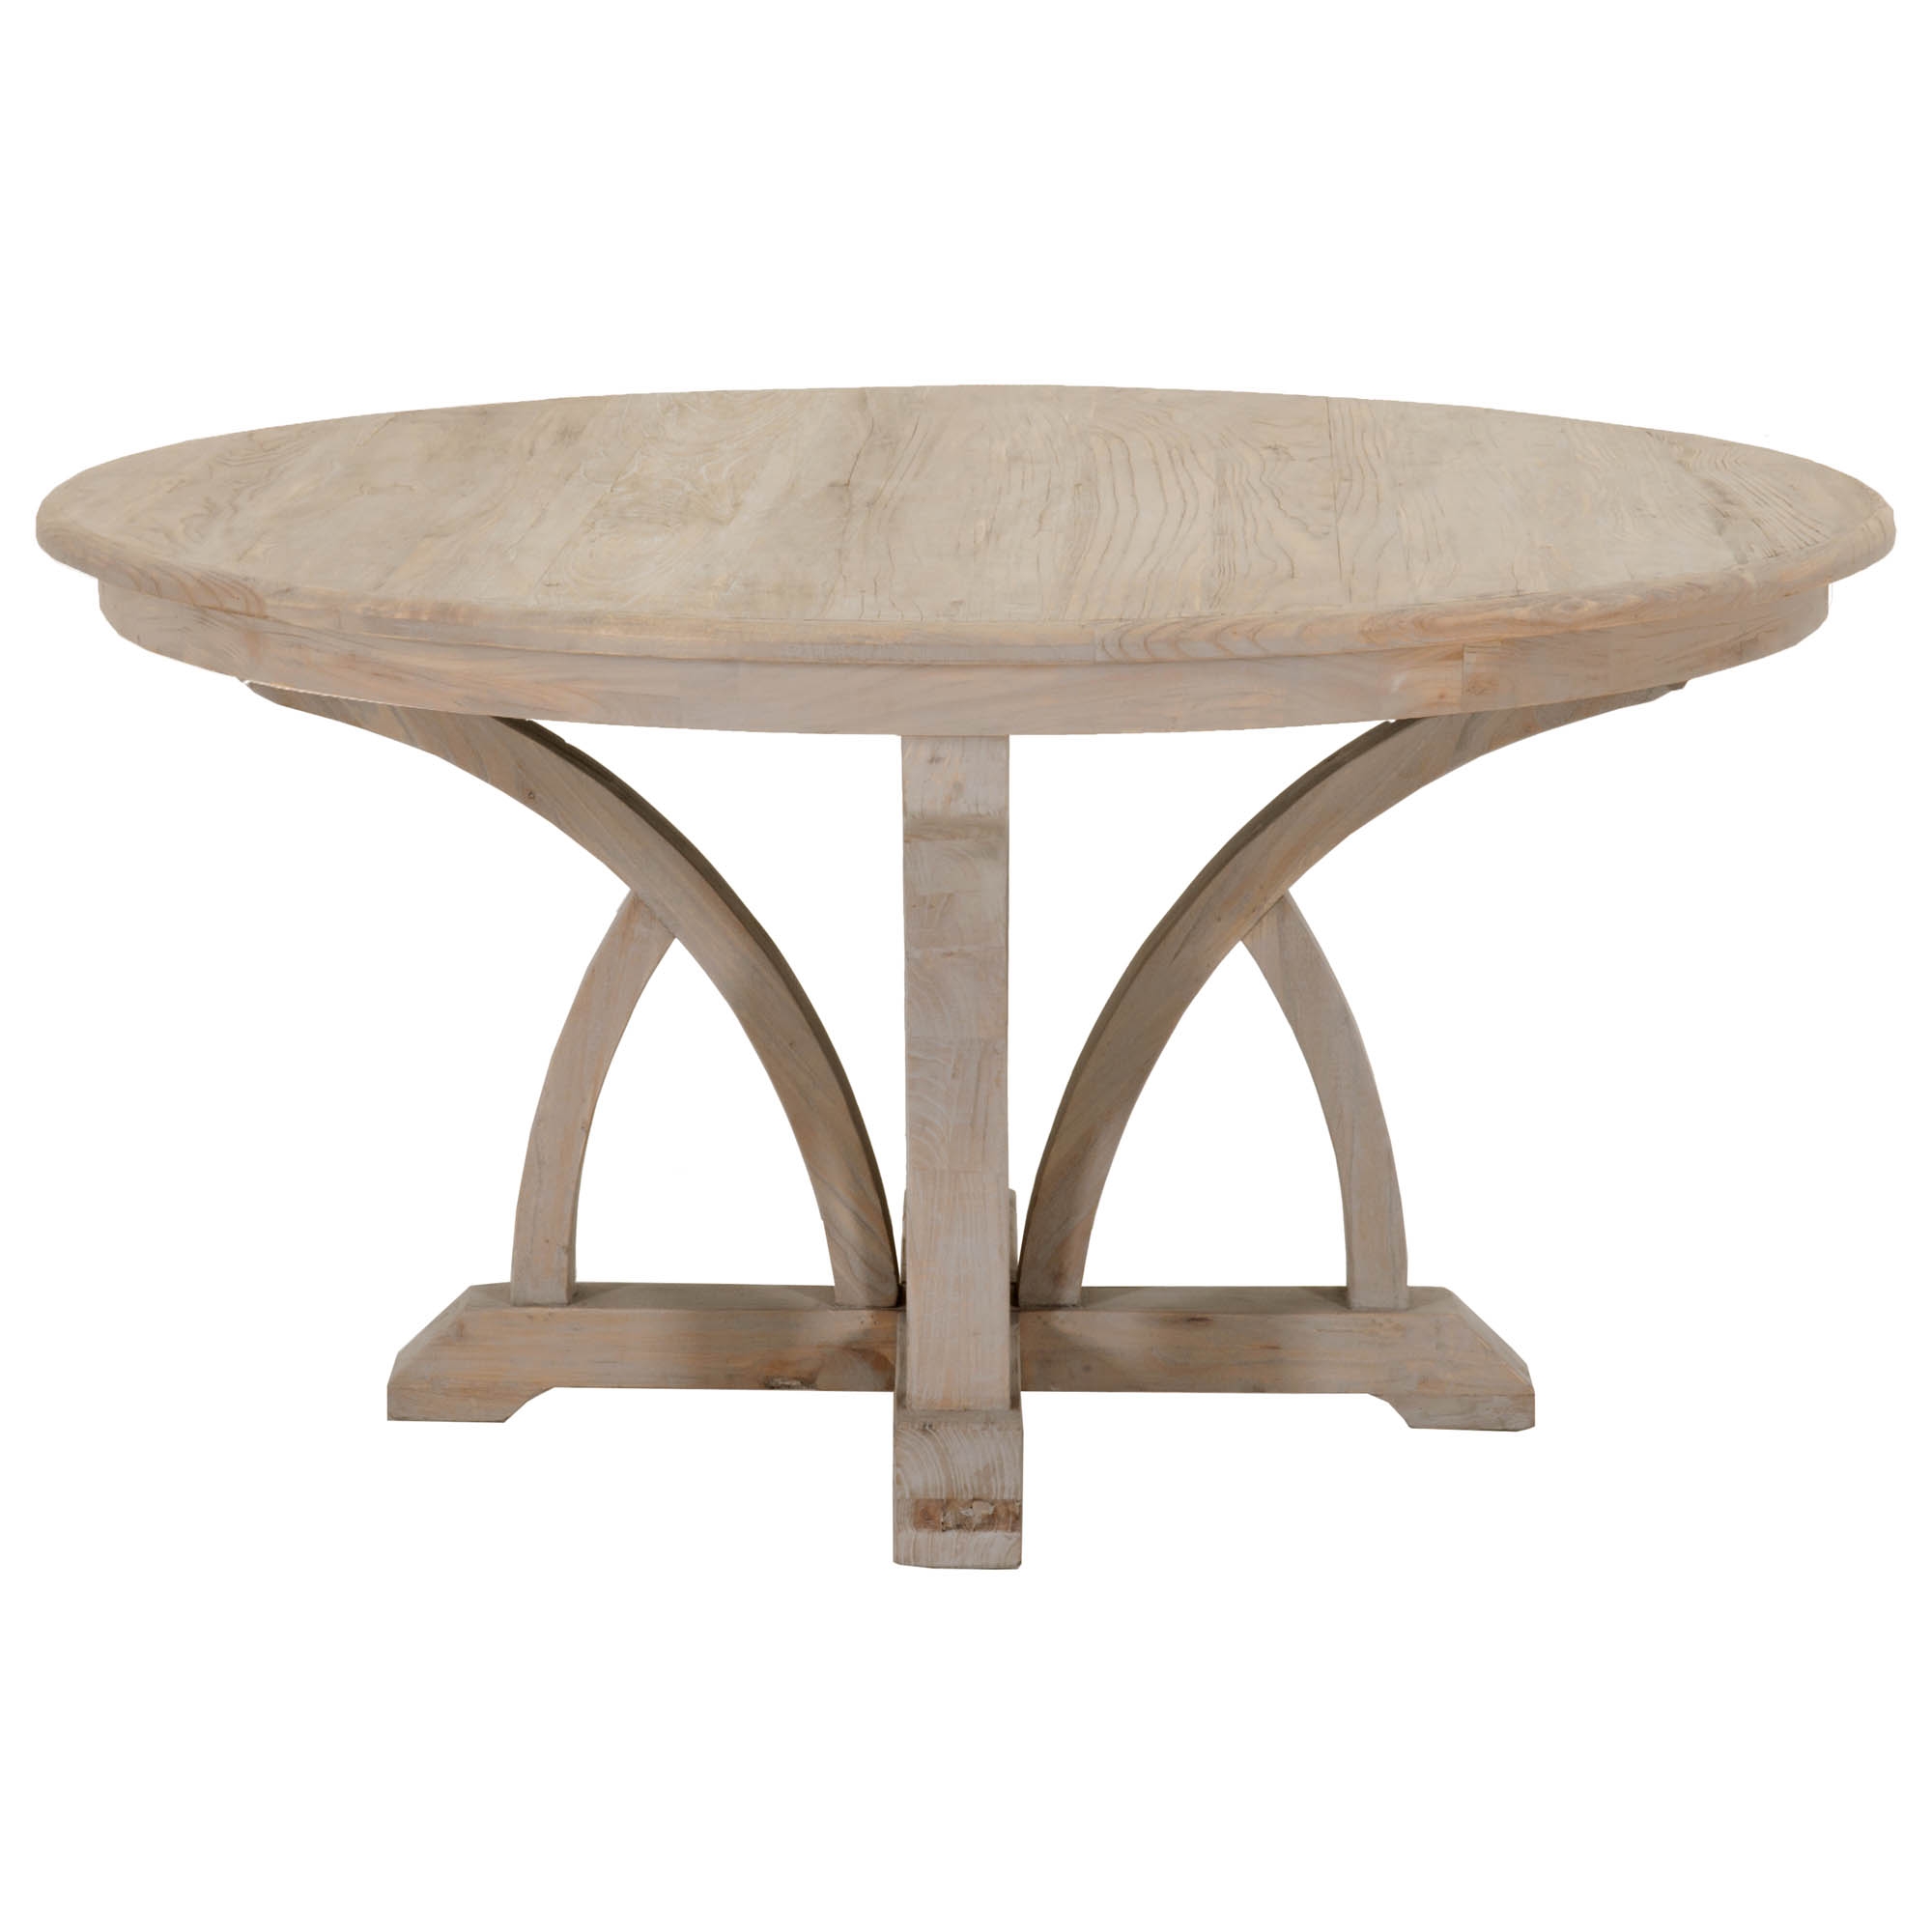 Marin Round Dining Table, 60", DISCONTINUED - Image 1